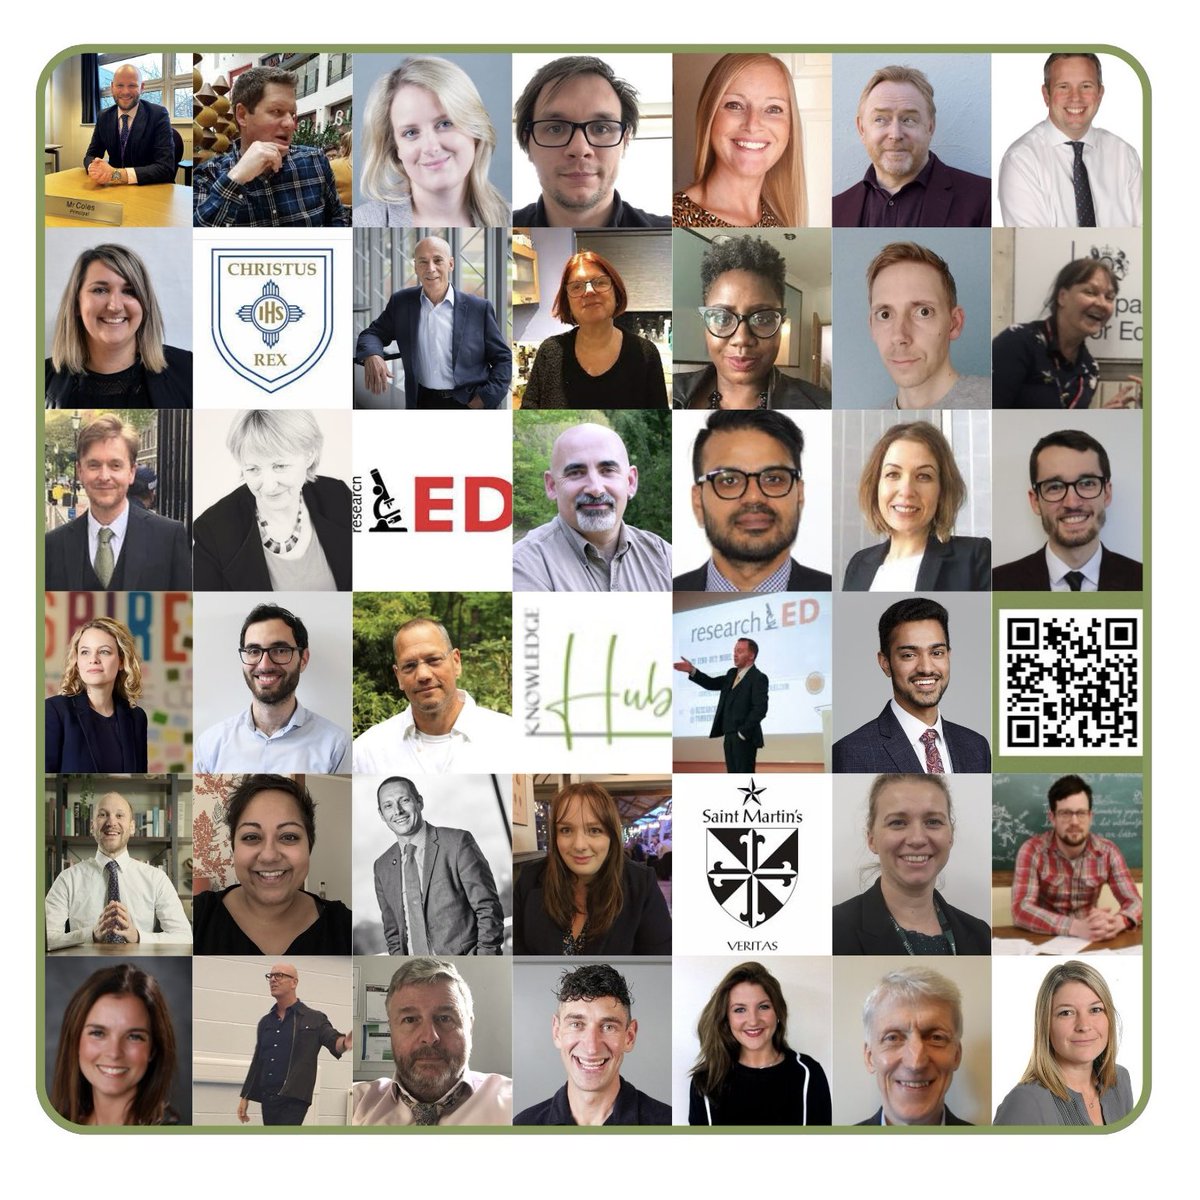 Such a privilege to have @TheWellsAcademy as a new ELP school host with expert leaders: @NAveyard from @TheWellscademy, @RashelRahman5 @q3langley , JB @stmartin1963, @MrPSaxton. Generous, brilliant people! TY! @exemplaryLP exemplaryleadership.org.uk